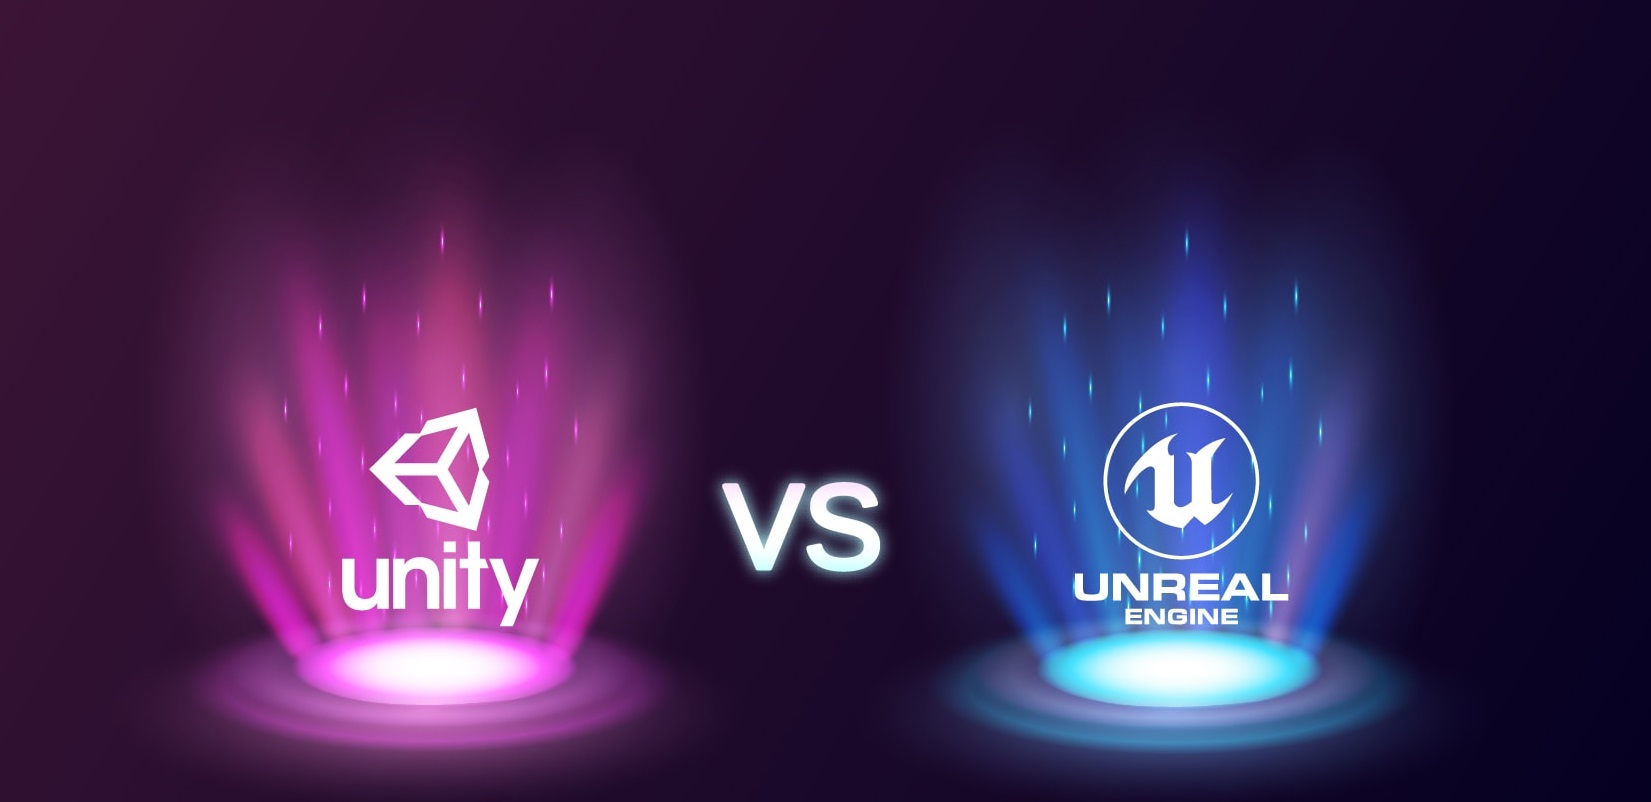 Different features of unity and unreal engine